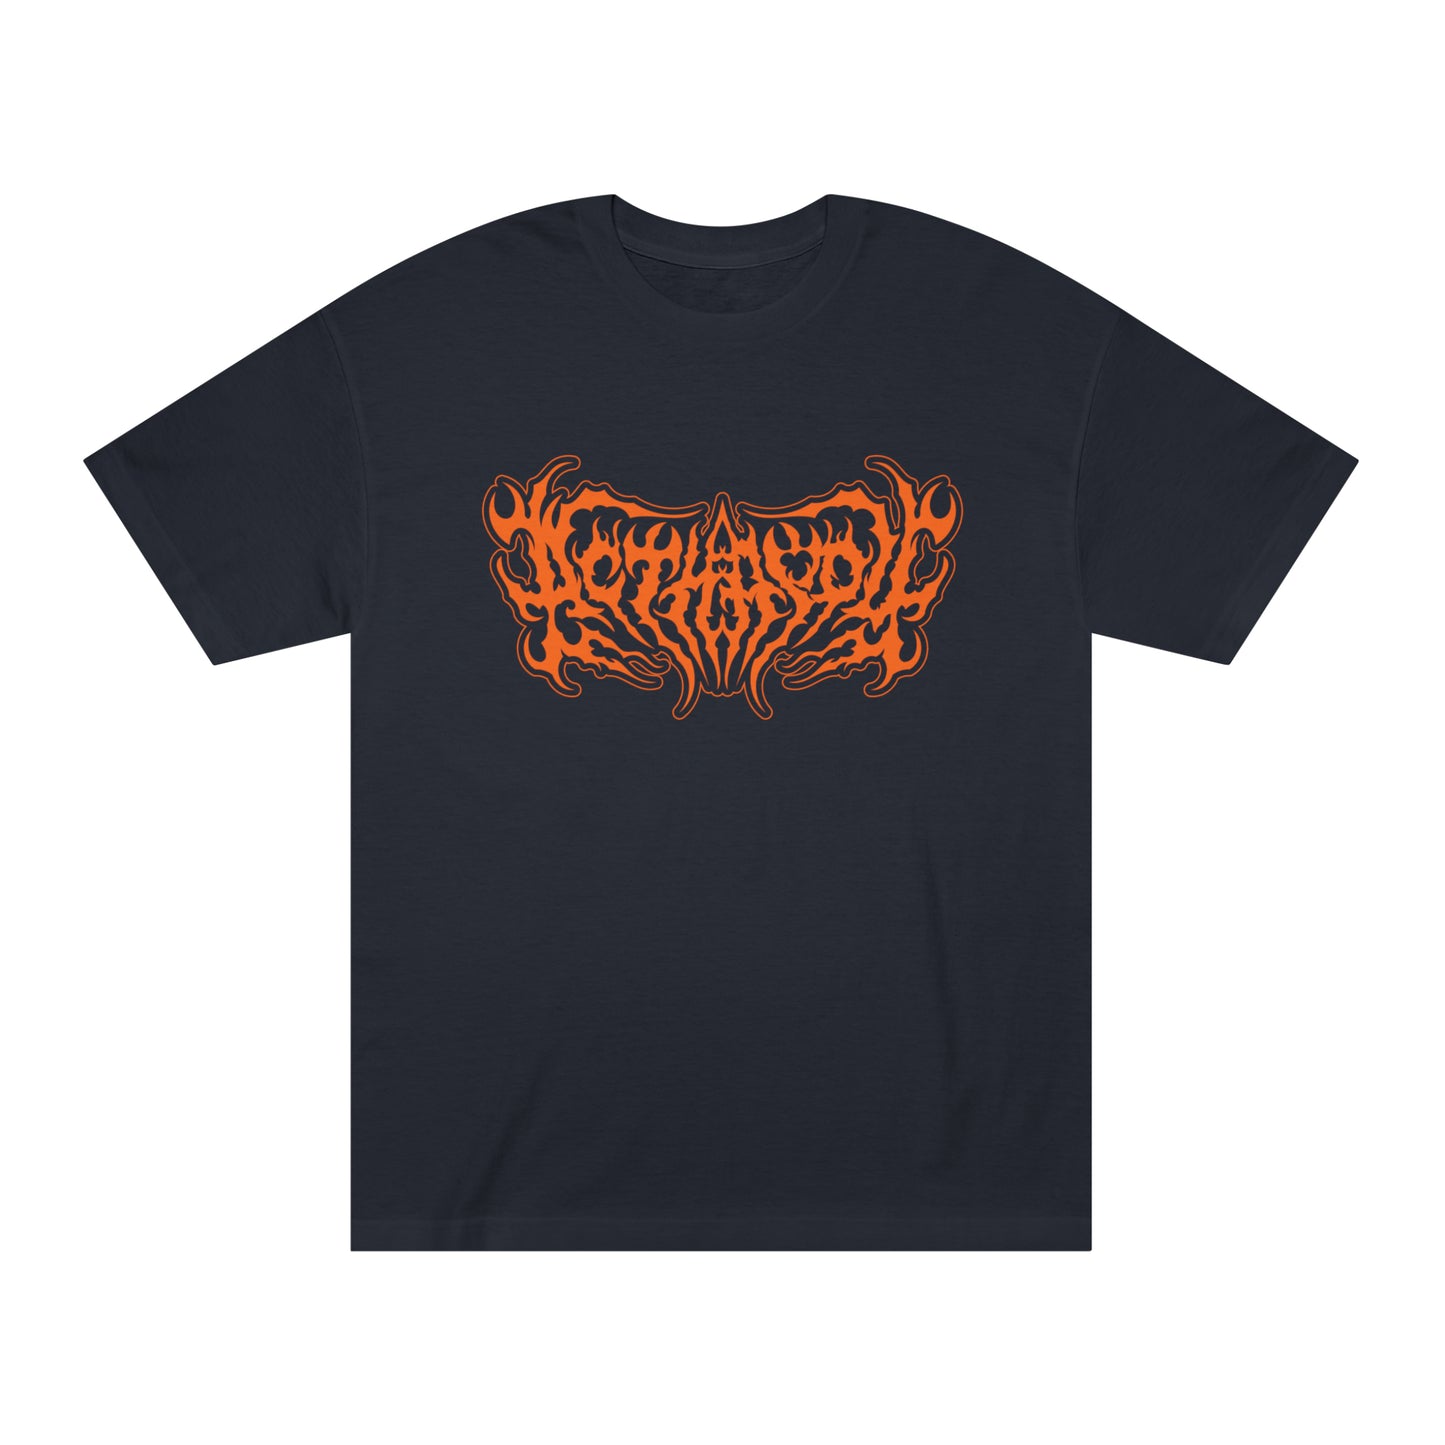 ActHappy Metal T-Shirt